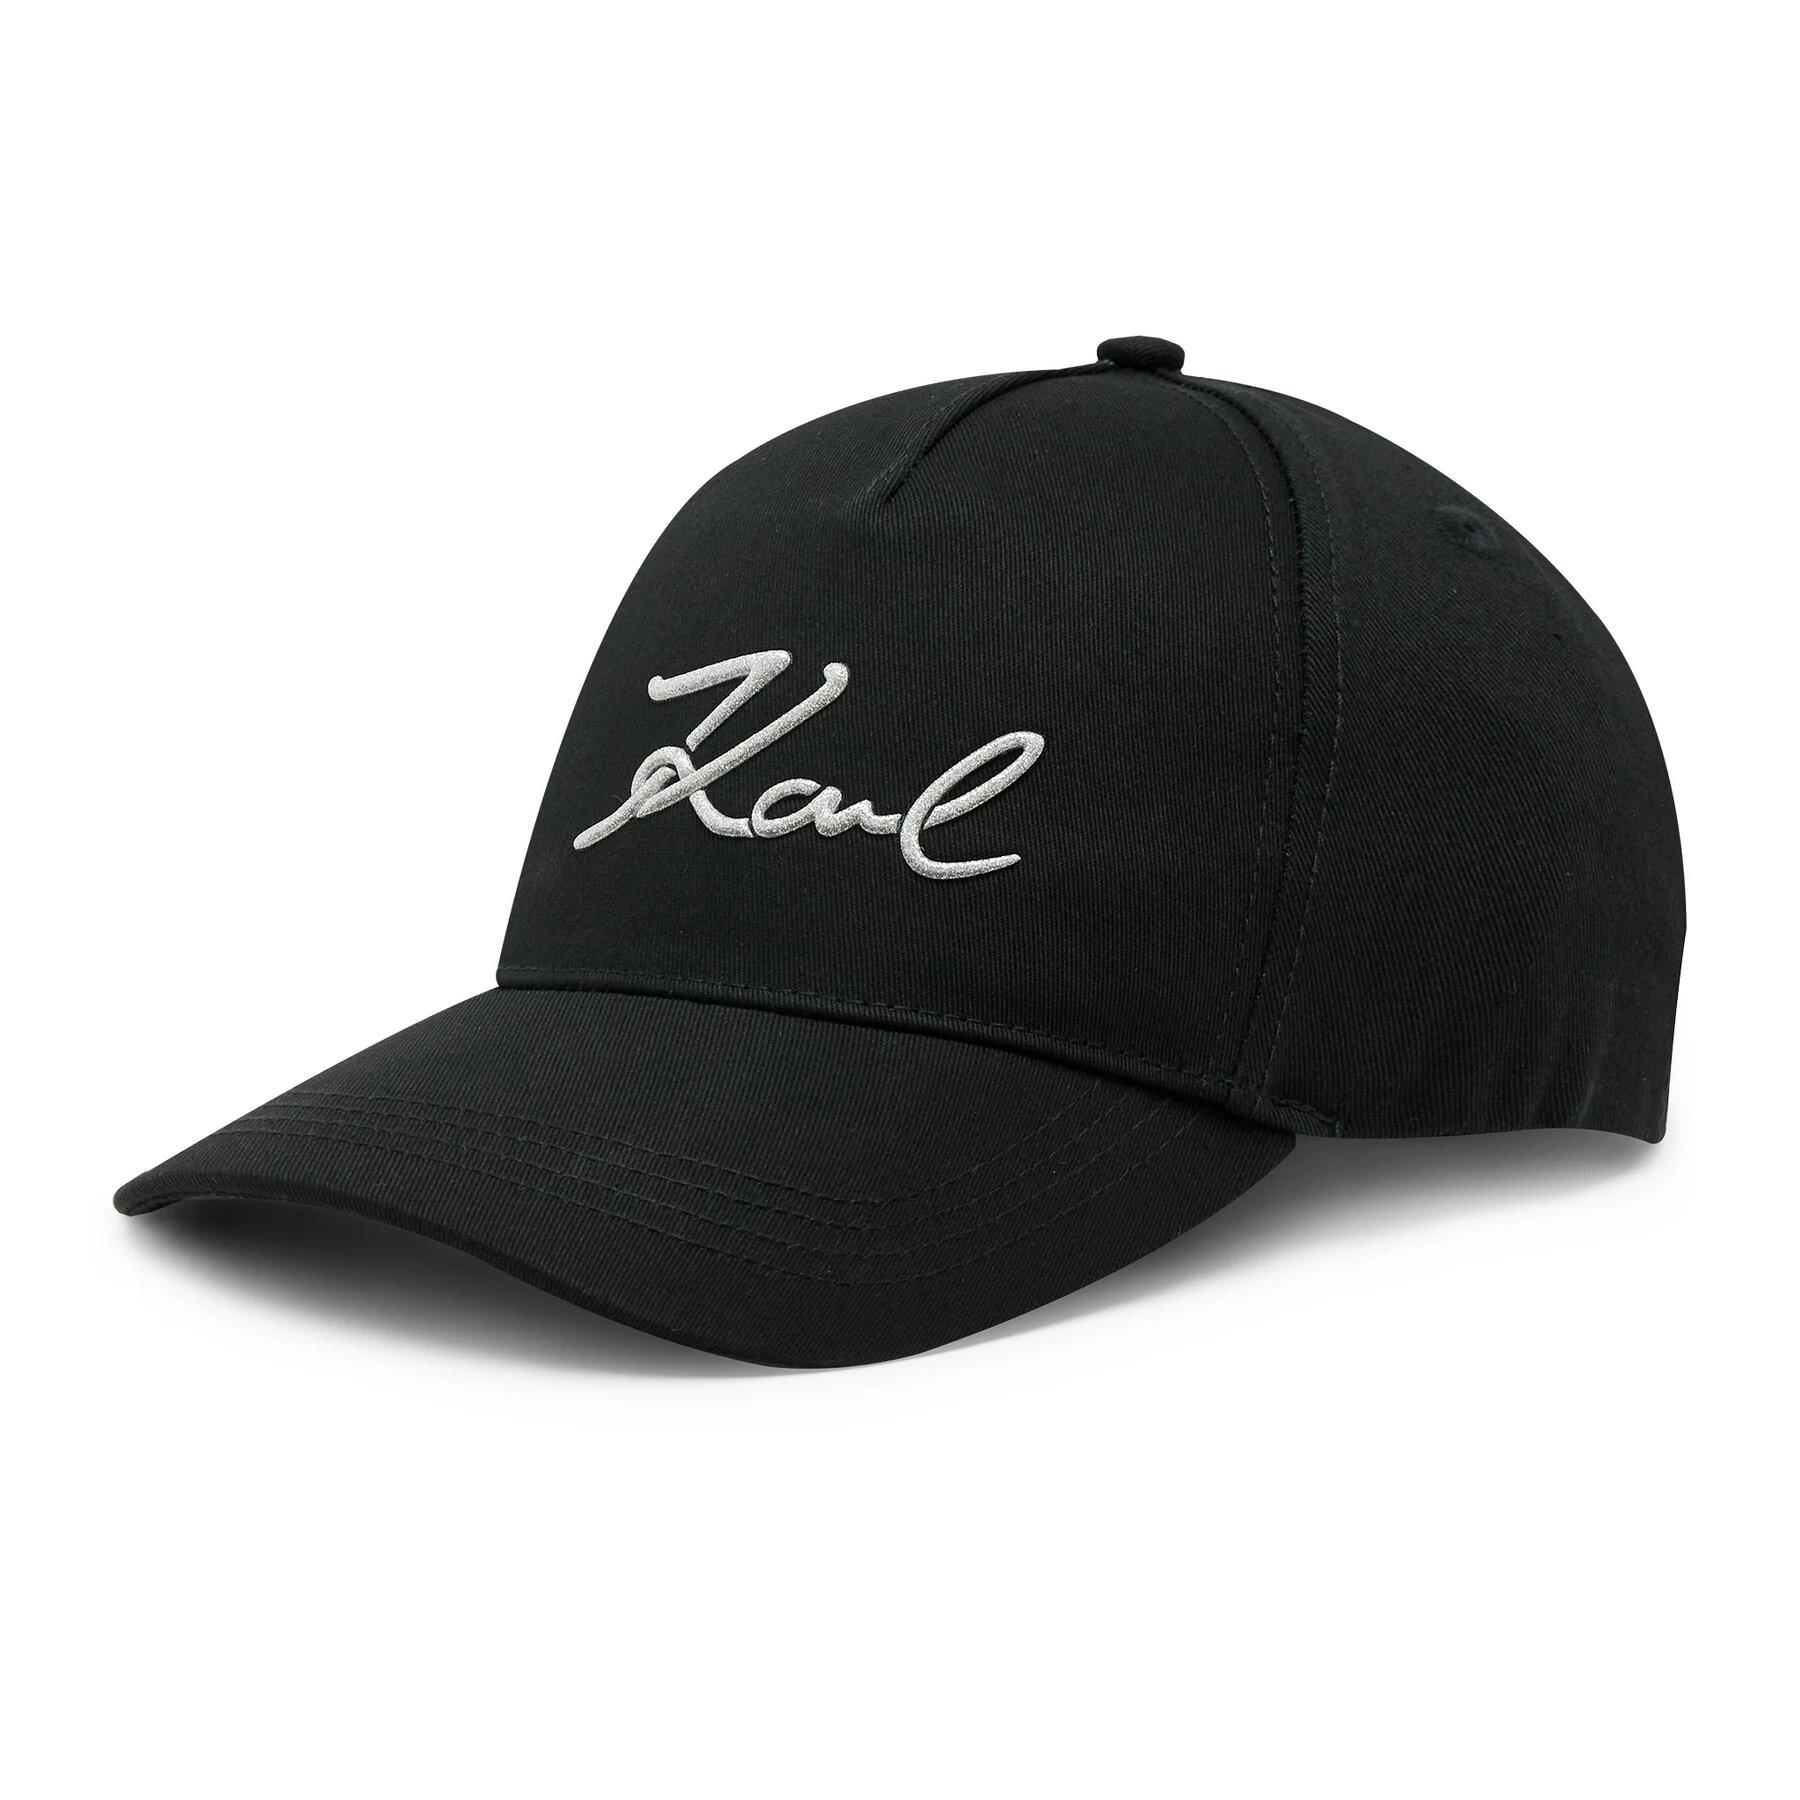 gorra mujer karl lagerfeld 230w3410 black a999 8720744104865 dolcevitaboutique